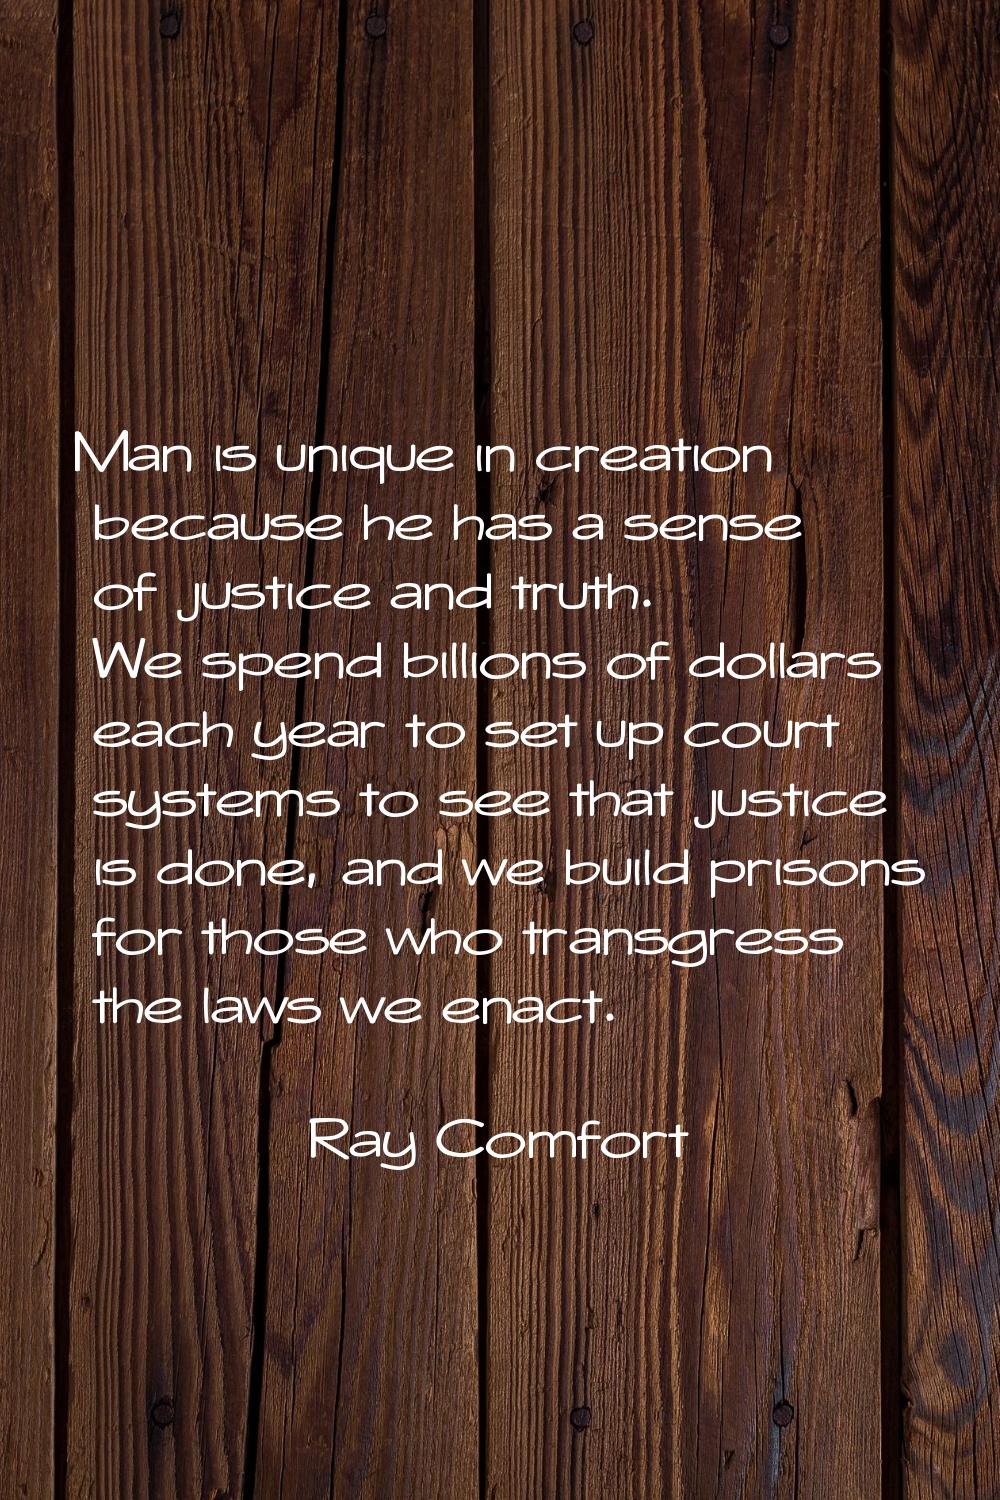 Man is unique in creation because he has a sense of justice and truth. We spend billions of dollars